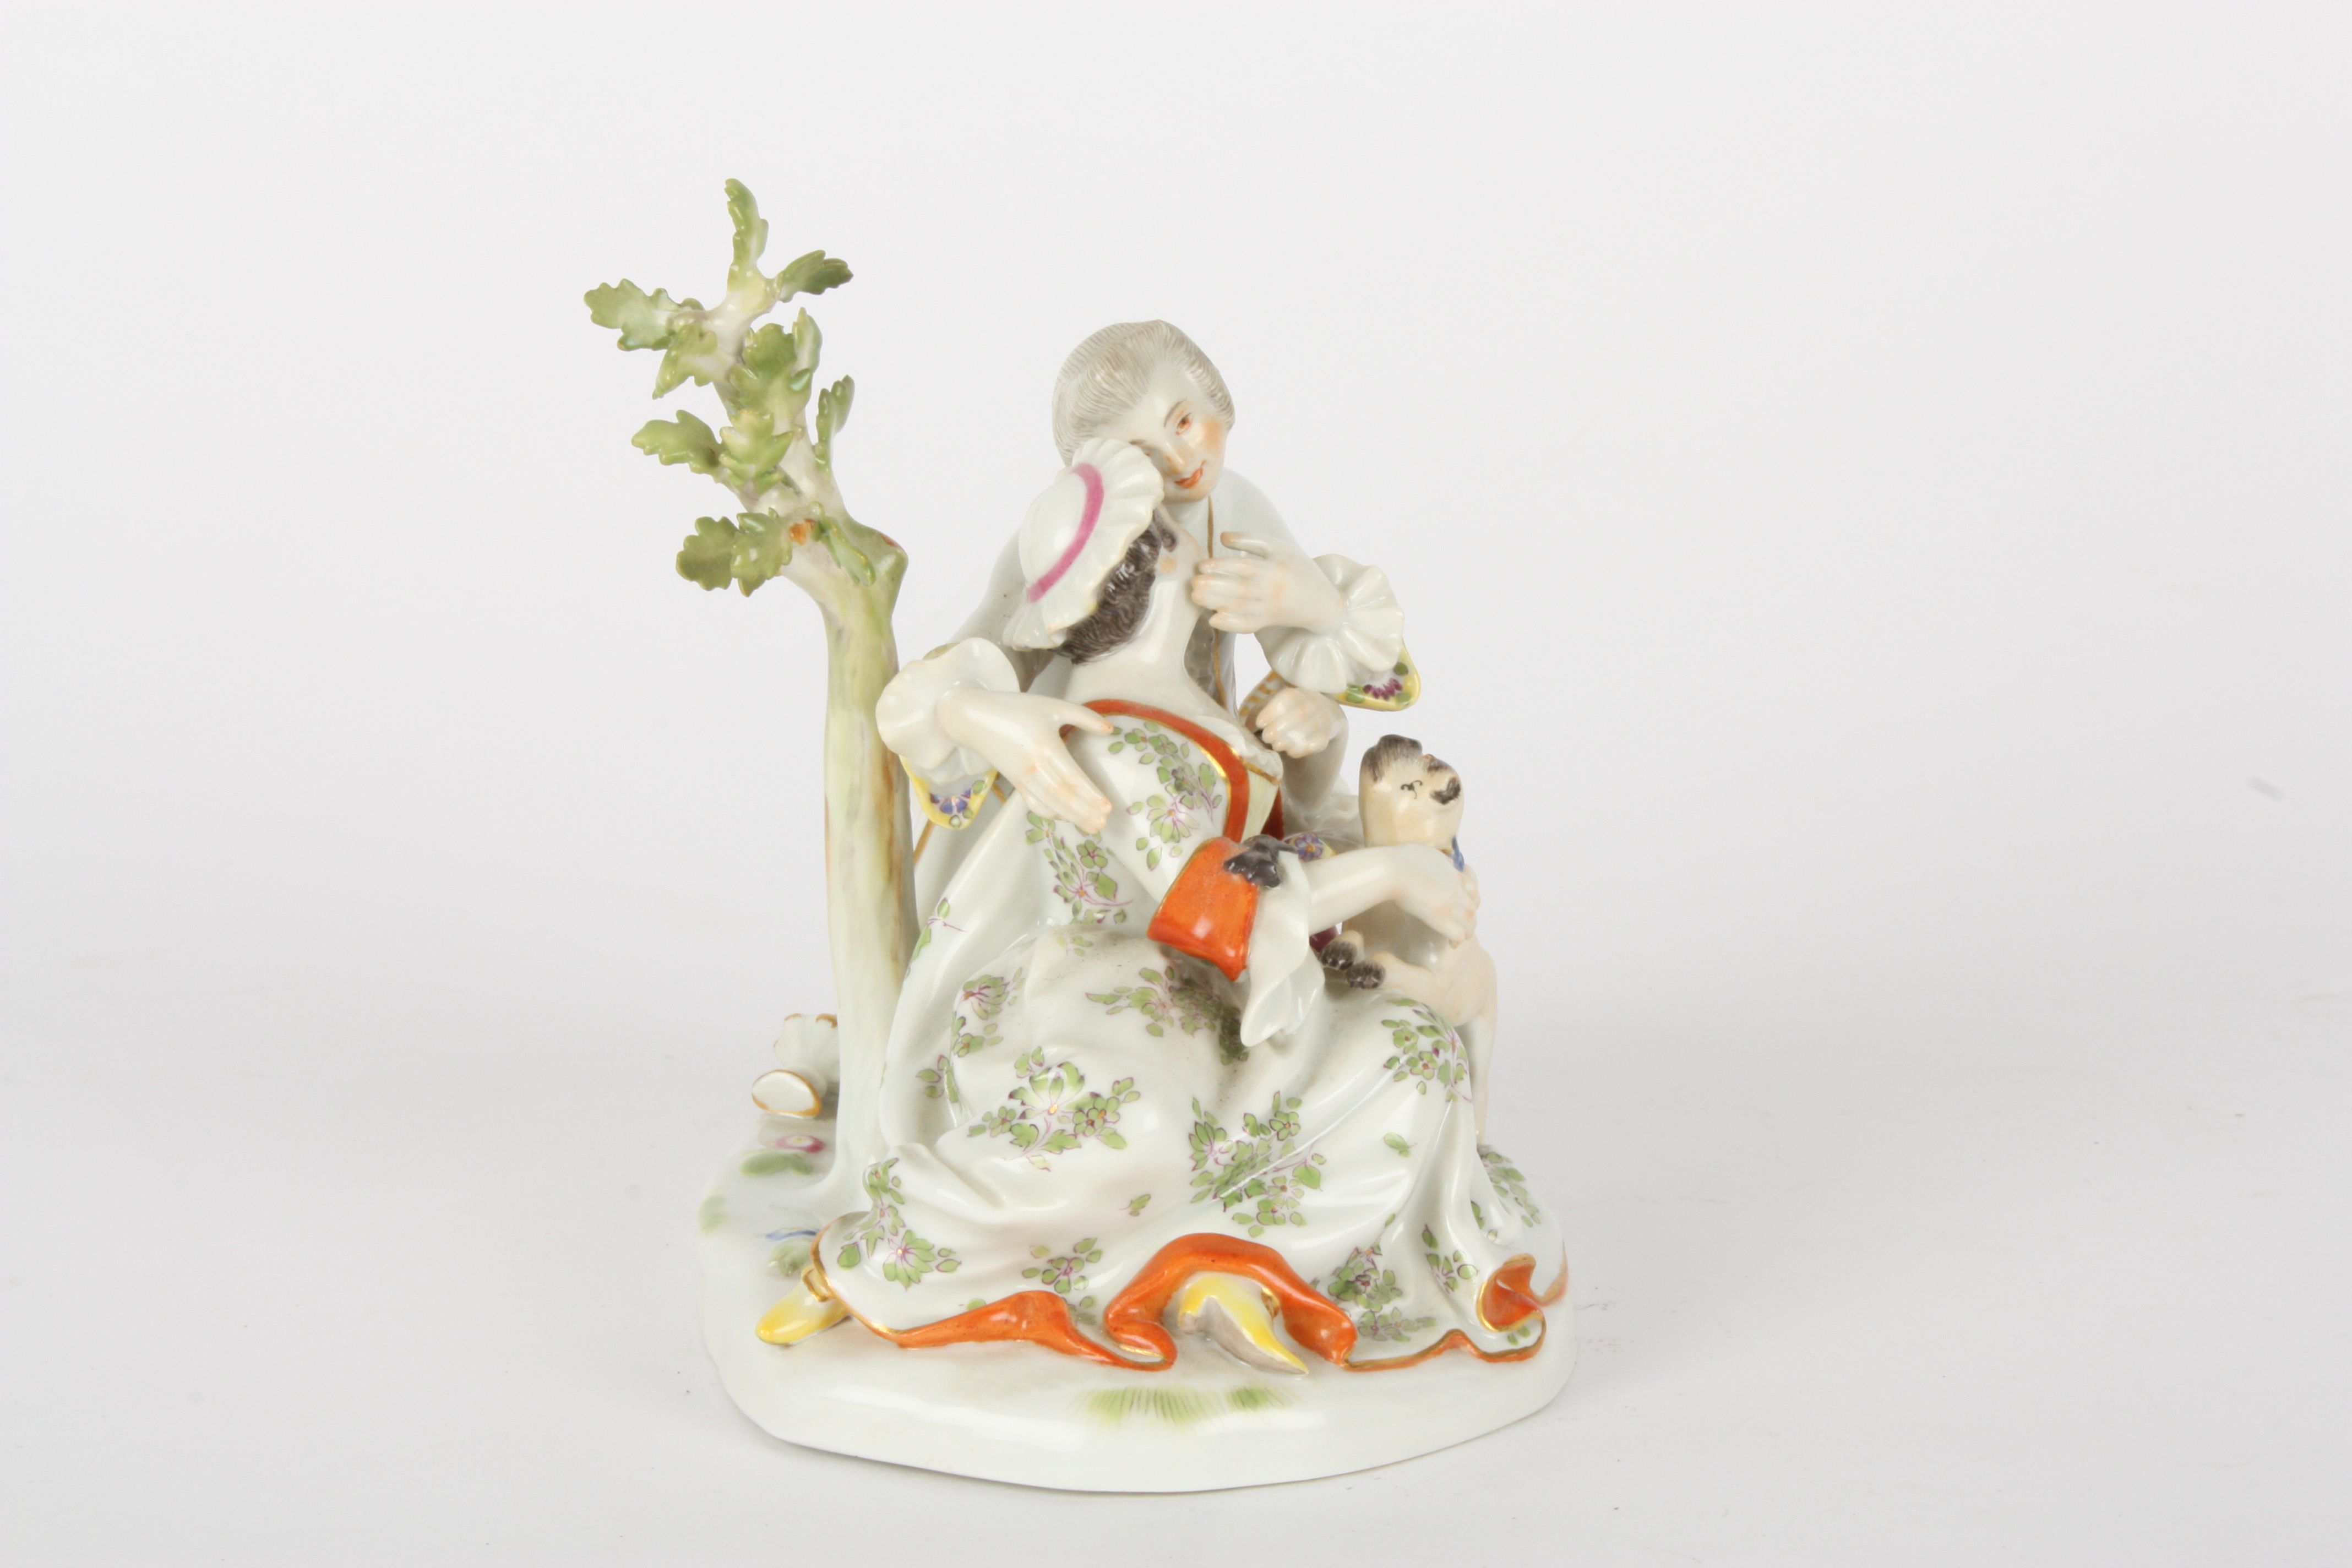 Late 20th century Meissen figure group, after Kaendler, courting couple seated, with a playful Pug - Image 4 of 5